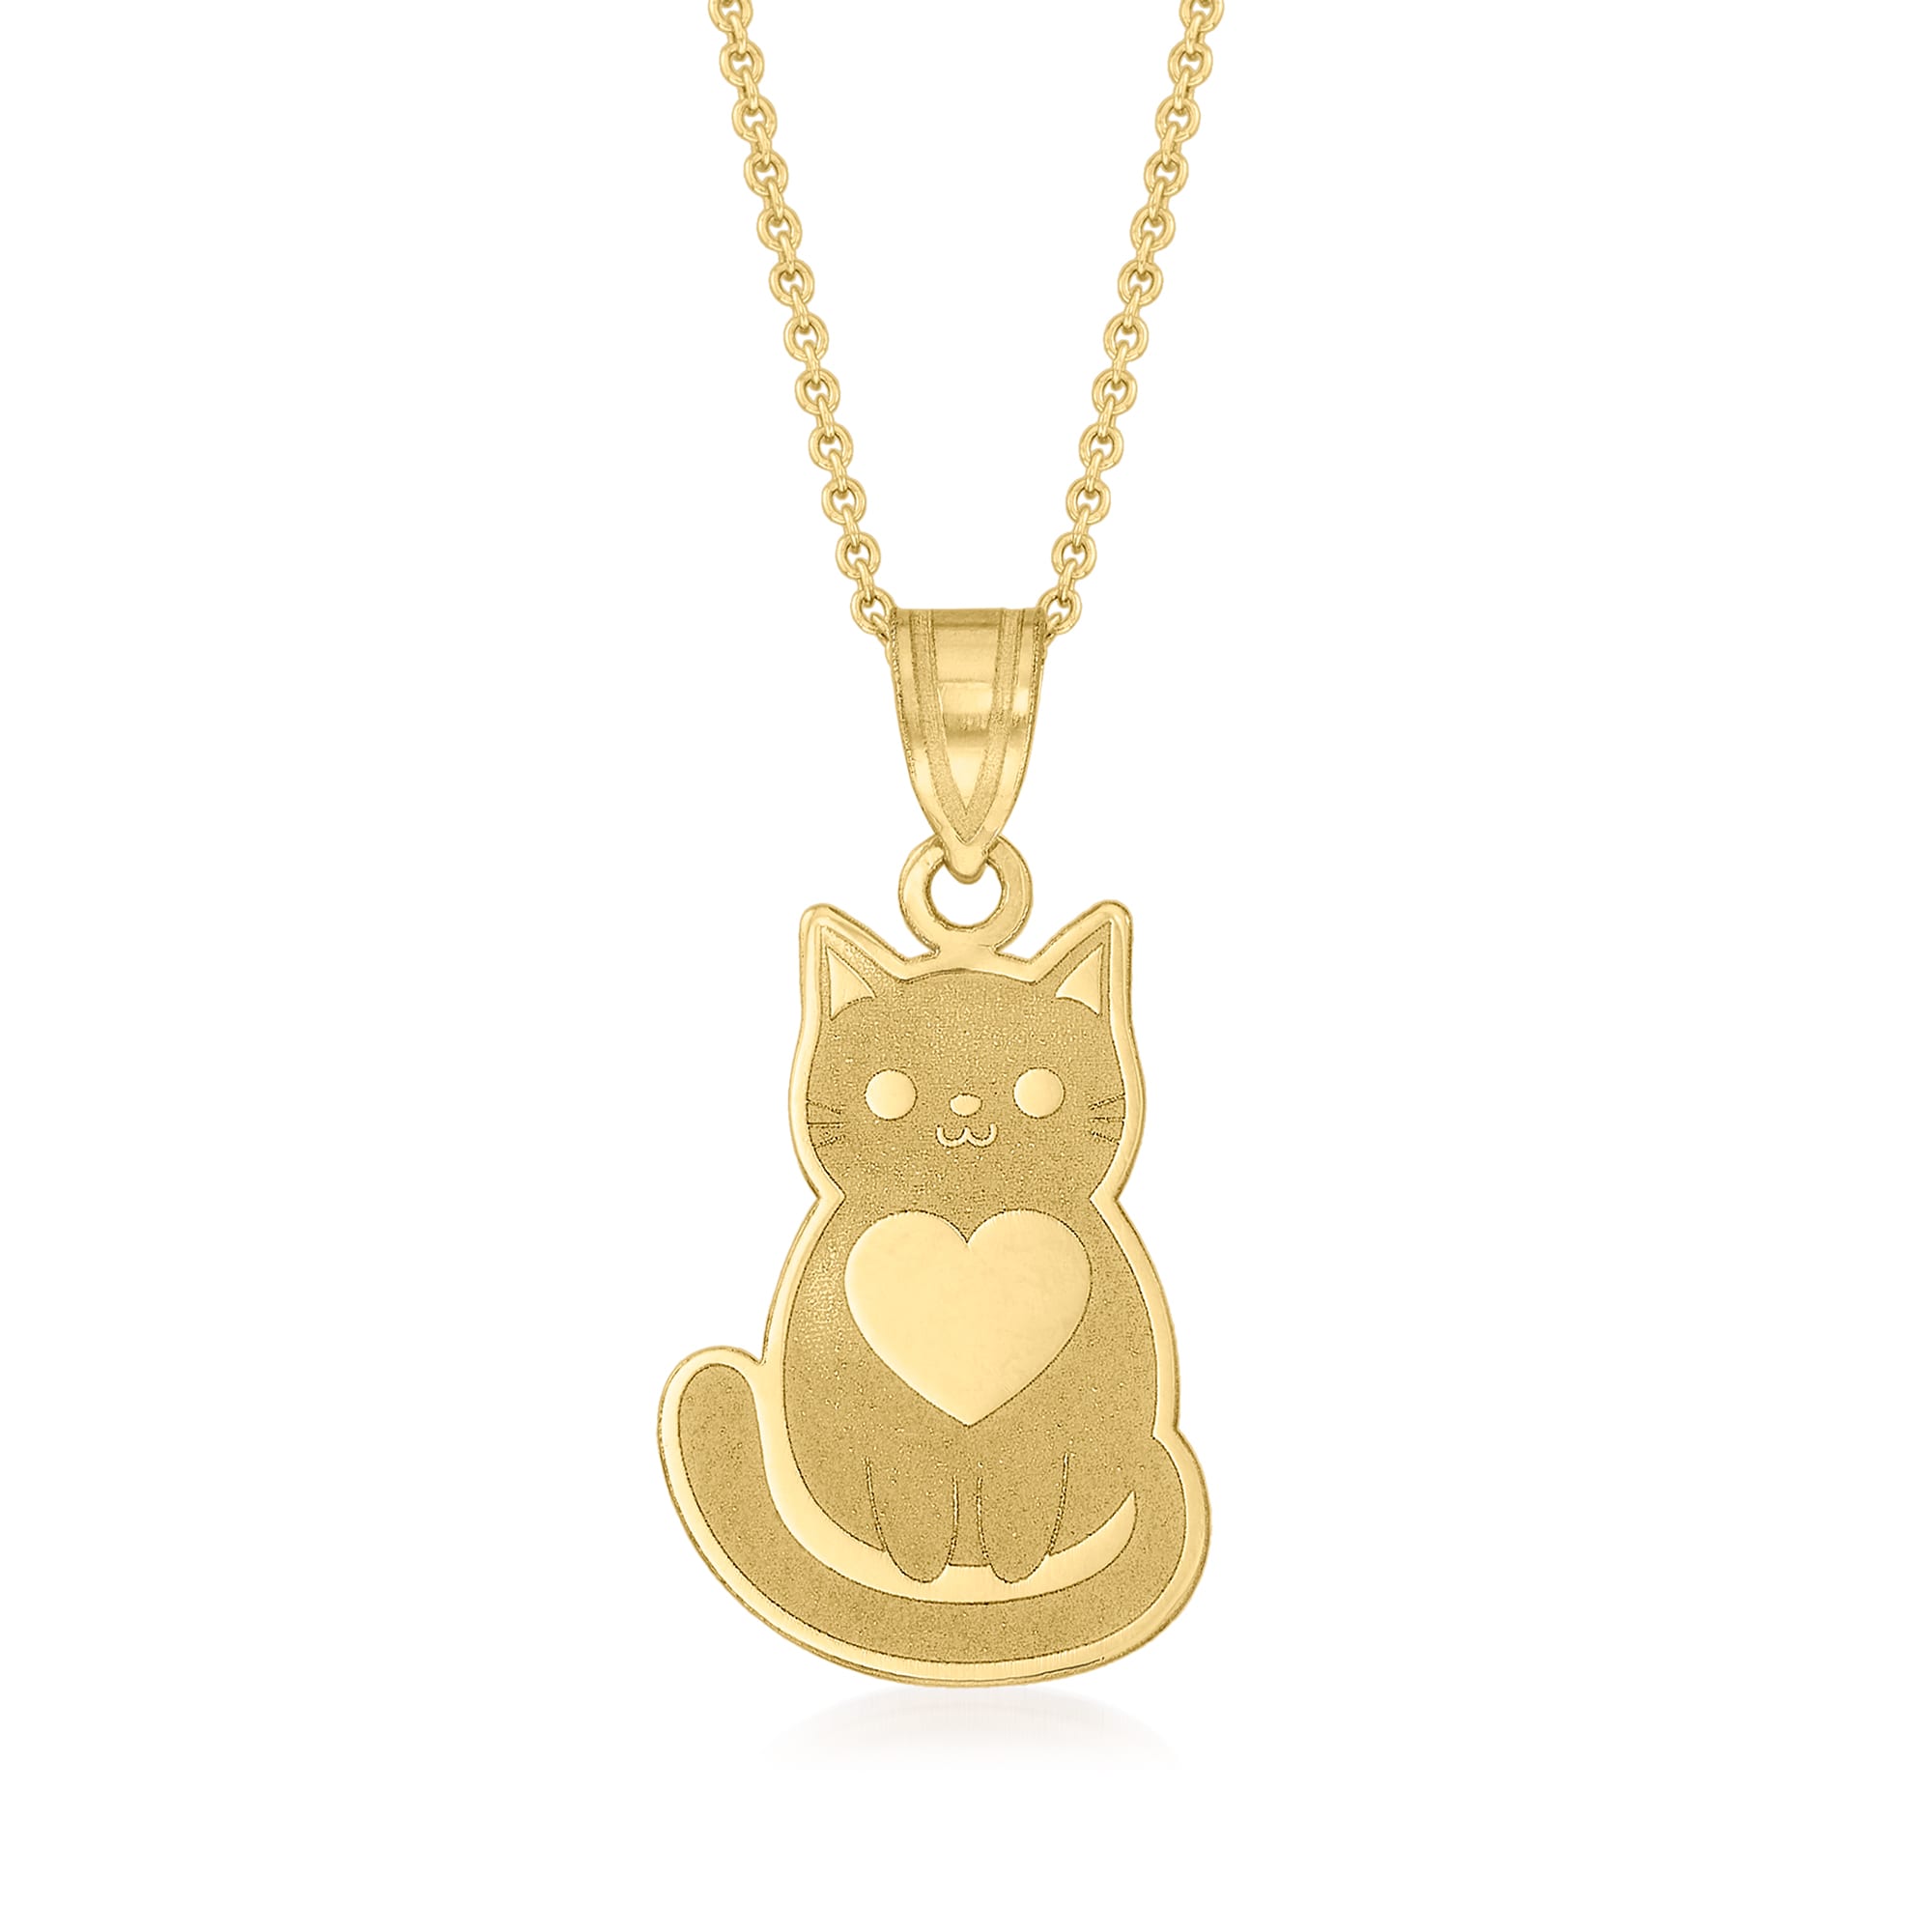 14kt Yellow Gold Cat Pendant Necklace. 18